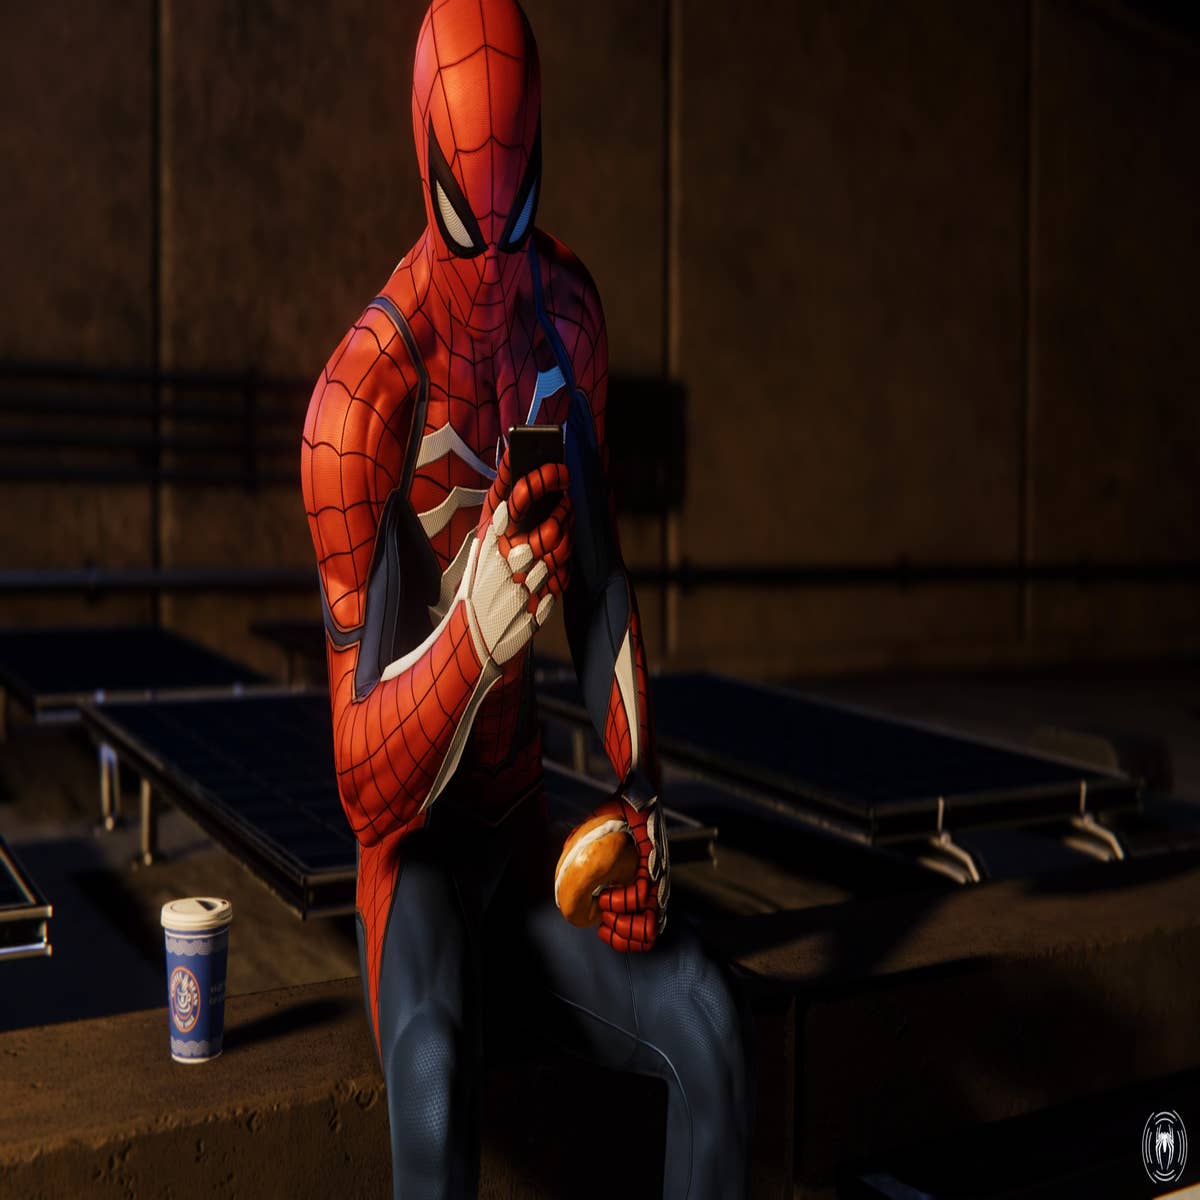 Marvel's Spider-Man review - a classic hero gets the game he